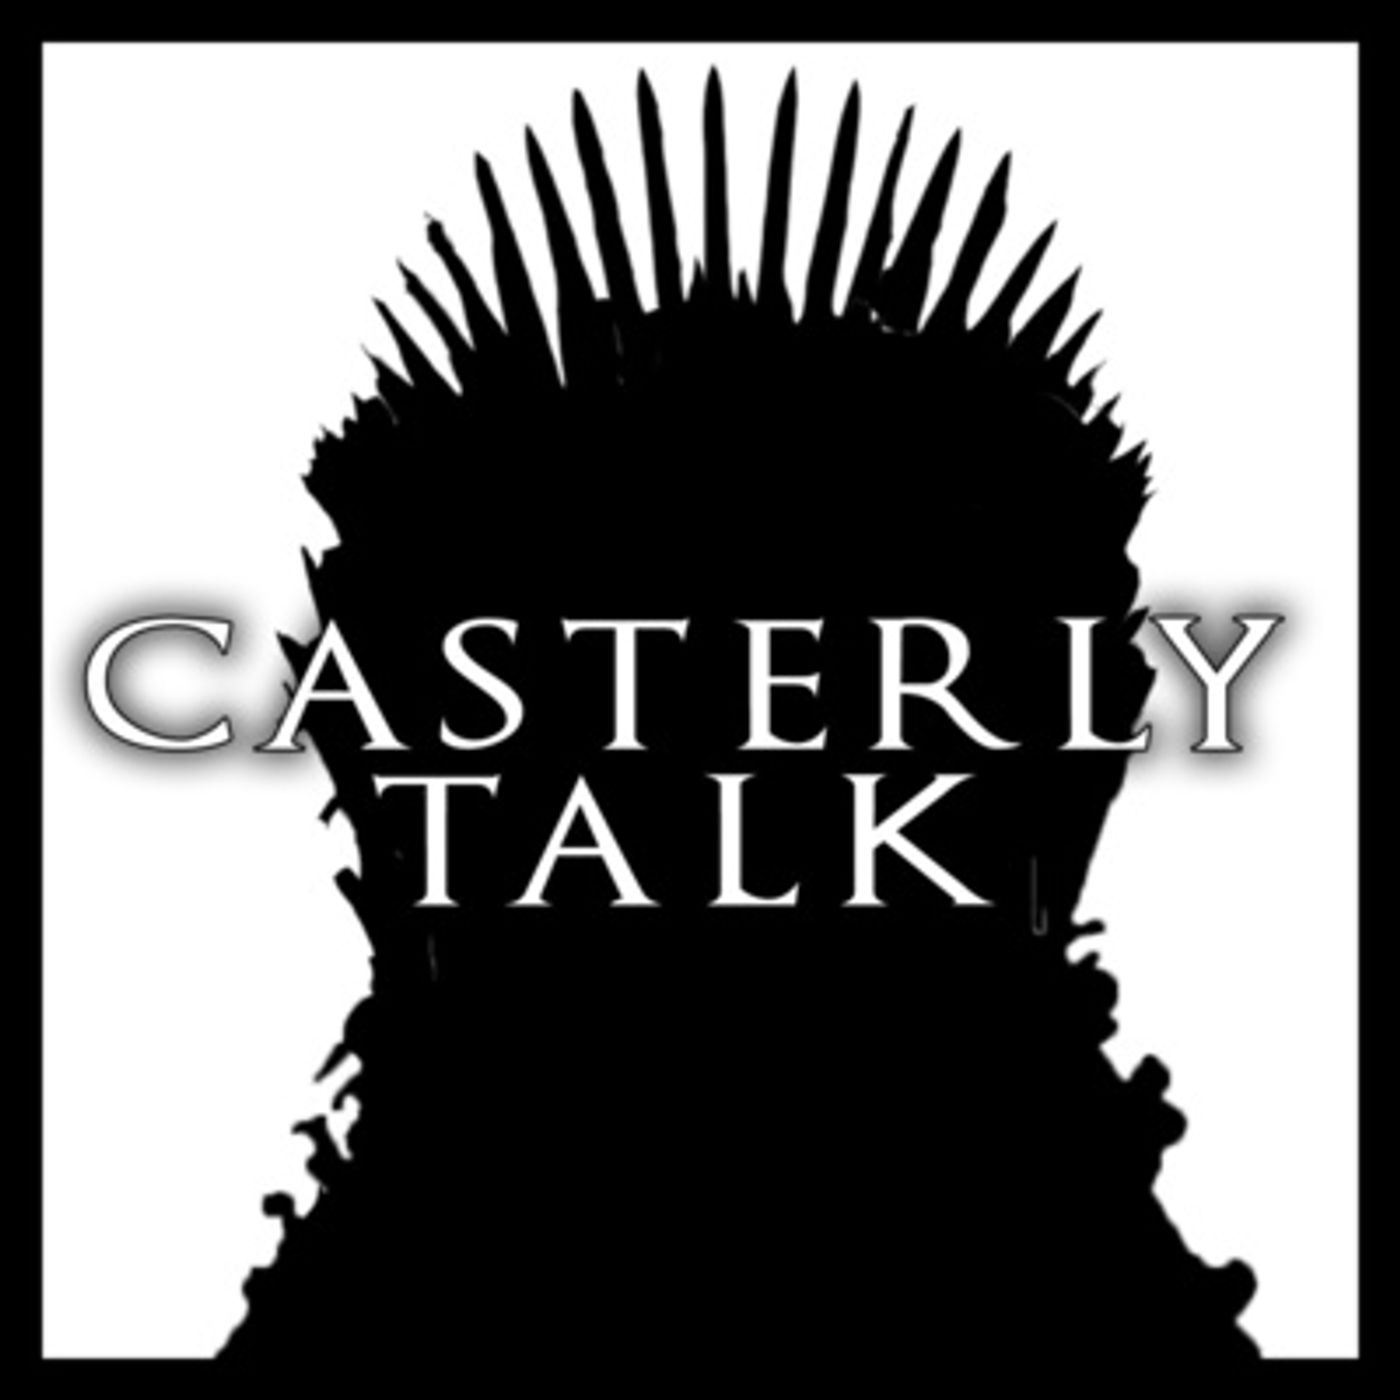 GEORGE RR MARTIN IS EXITED FOR HOUSE OF THE DRAGON - Casterly Talk - EP 115